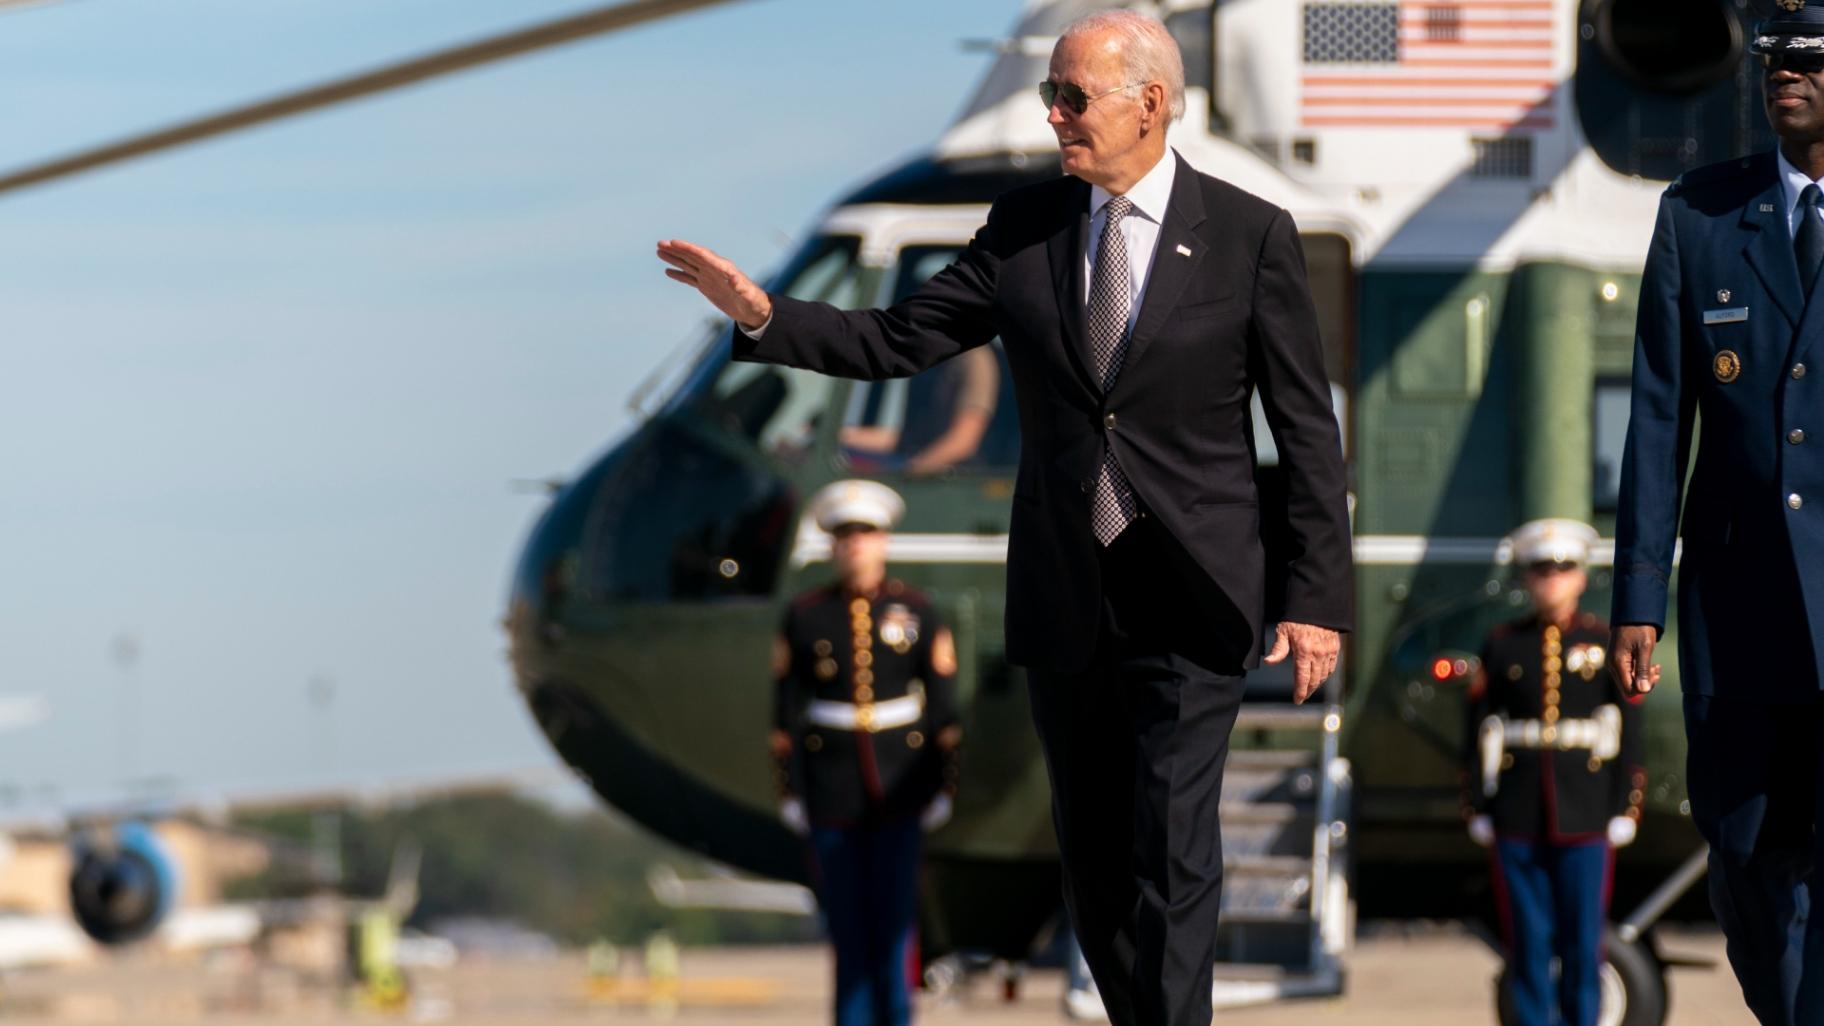 President Joe Biden boards Air Force One at Andrews Air Force Base, Md., Thursday, Oct. 6, 2022, to travel to Poughkeepsie, N.Y. (AP Photo / Andrew Harnik)